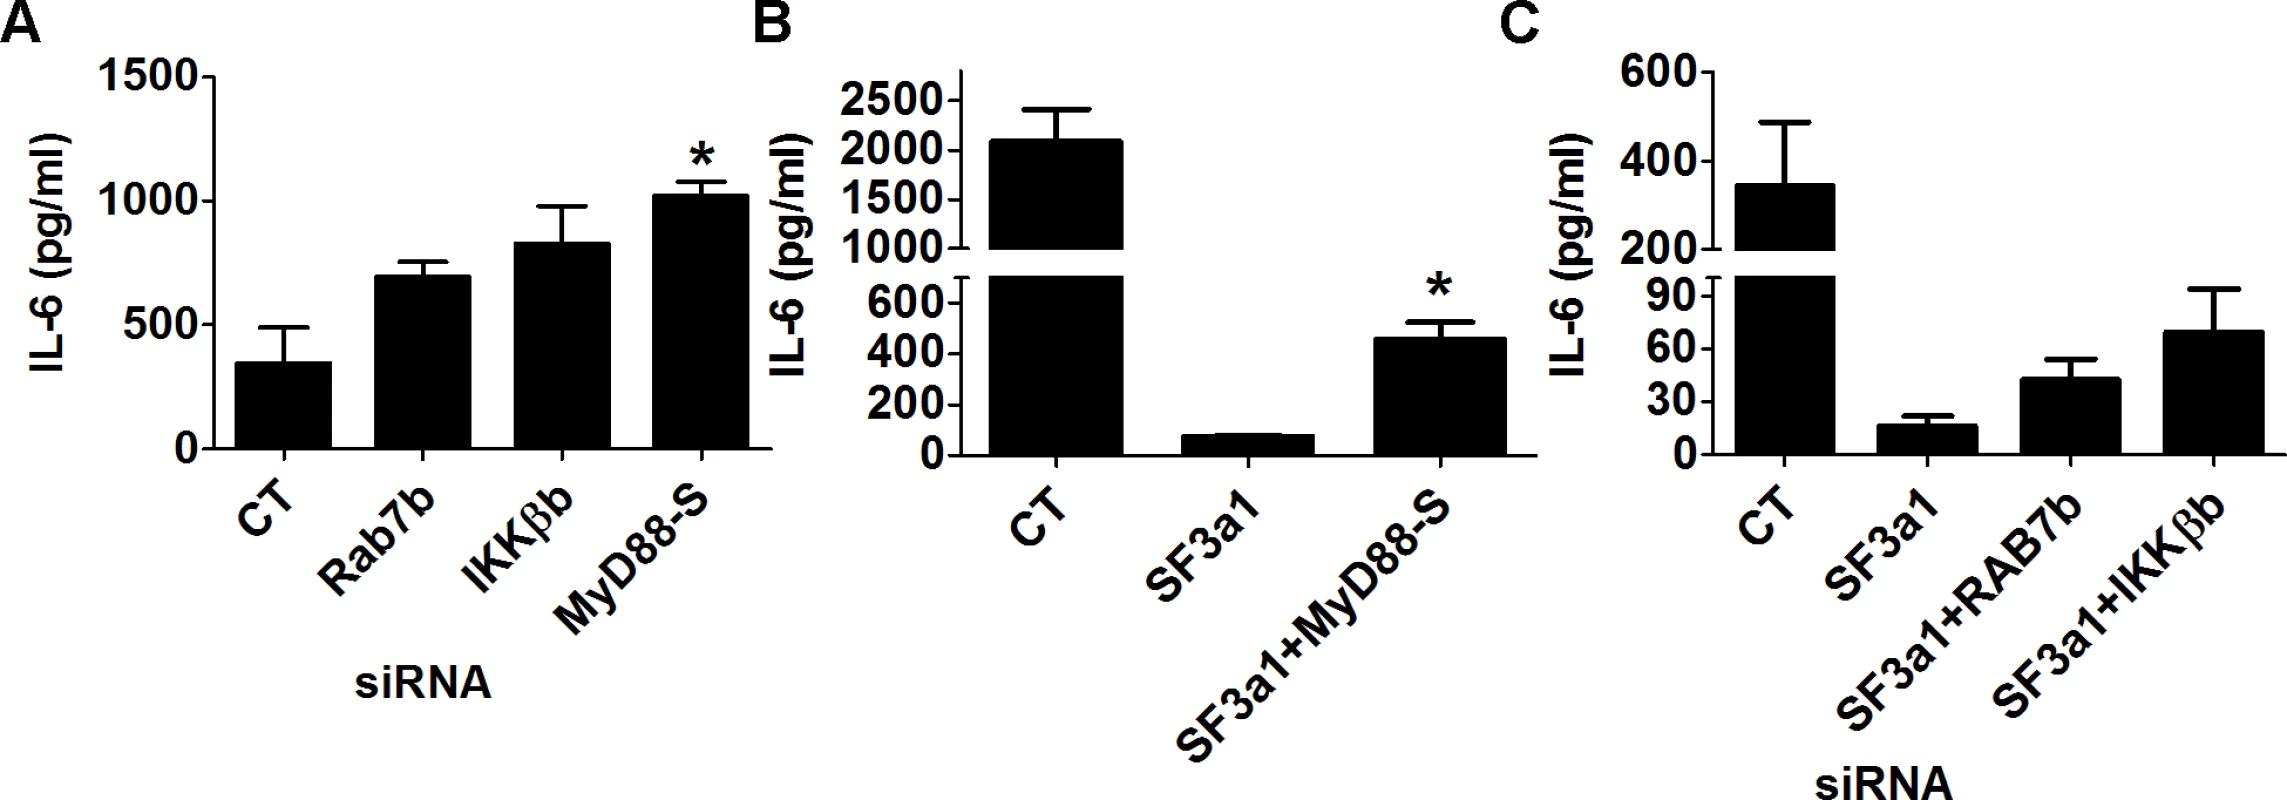 Multiple genes in the TLR signaling pathway mediate the effects of SF3a1 on innate immunity.